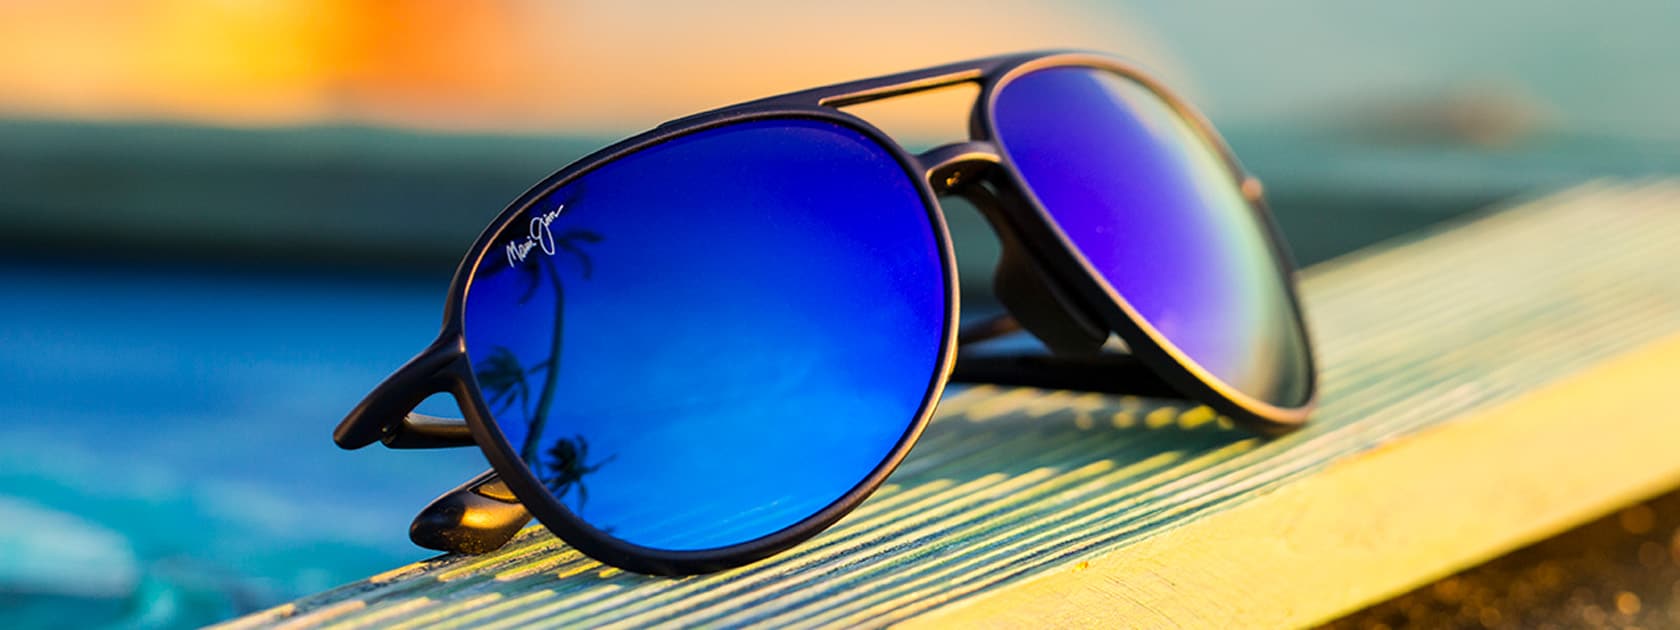 matte black sunglasses with blue lens on wood with palm tree and sky reflection